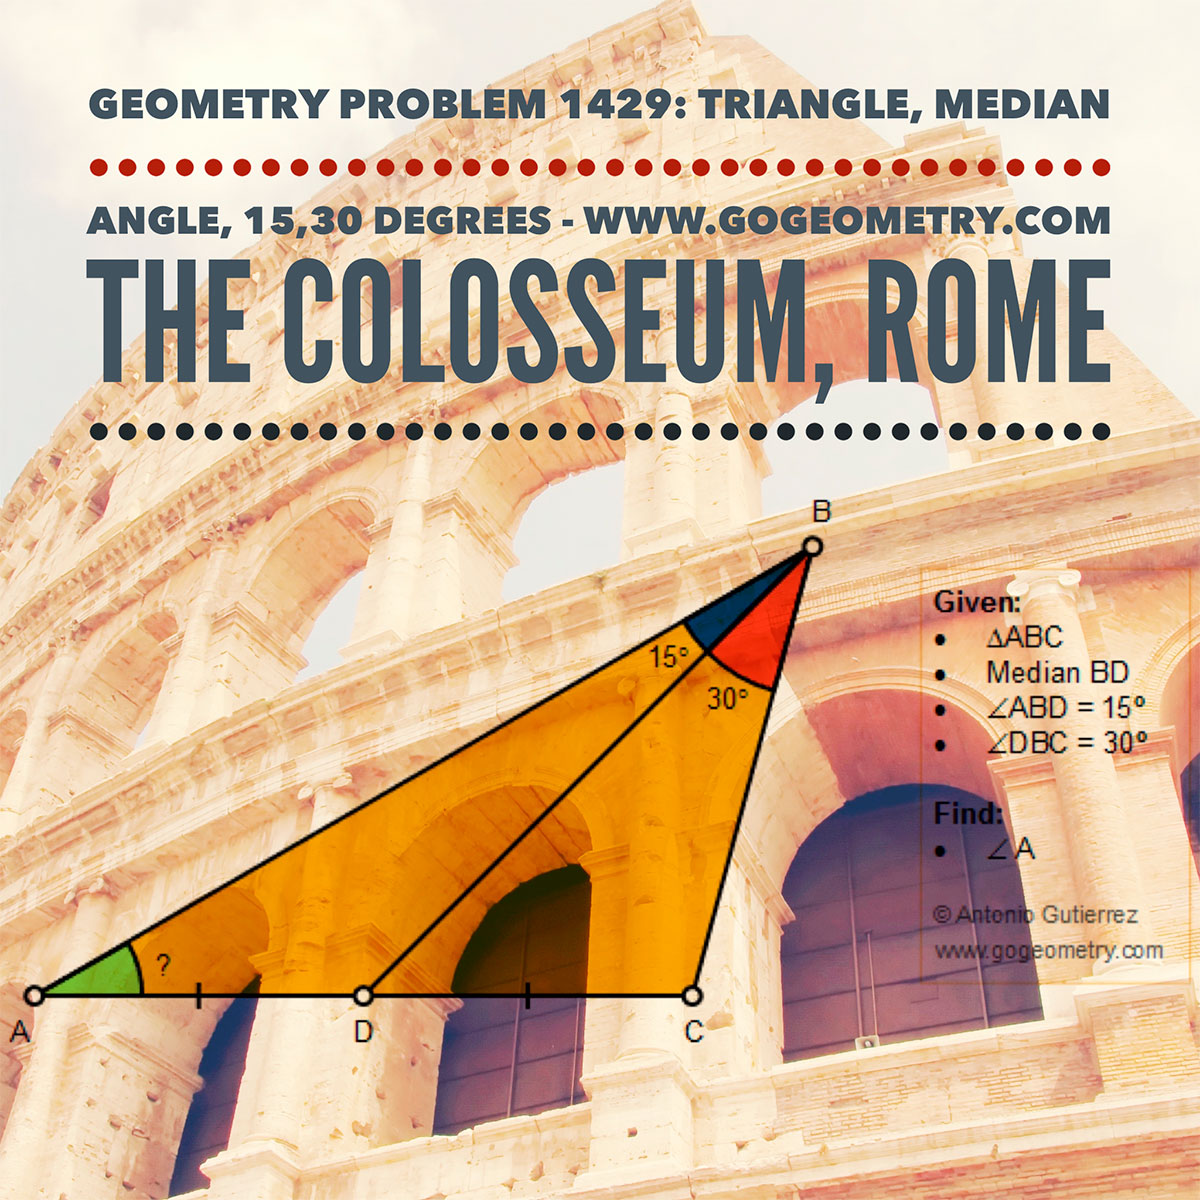 Geometry Problem 1429: Triangle, Median, 15-30 degree, Angle, Congruence, The Colosseum in the background